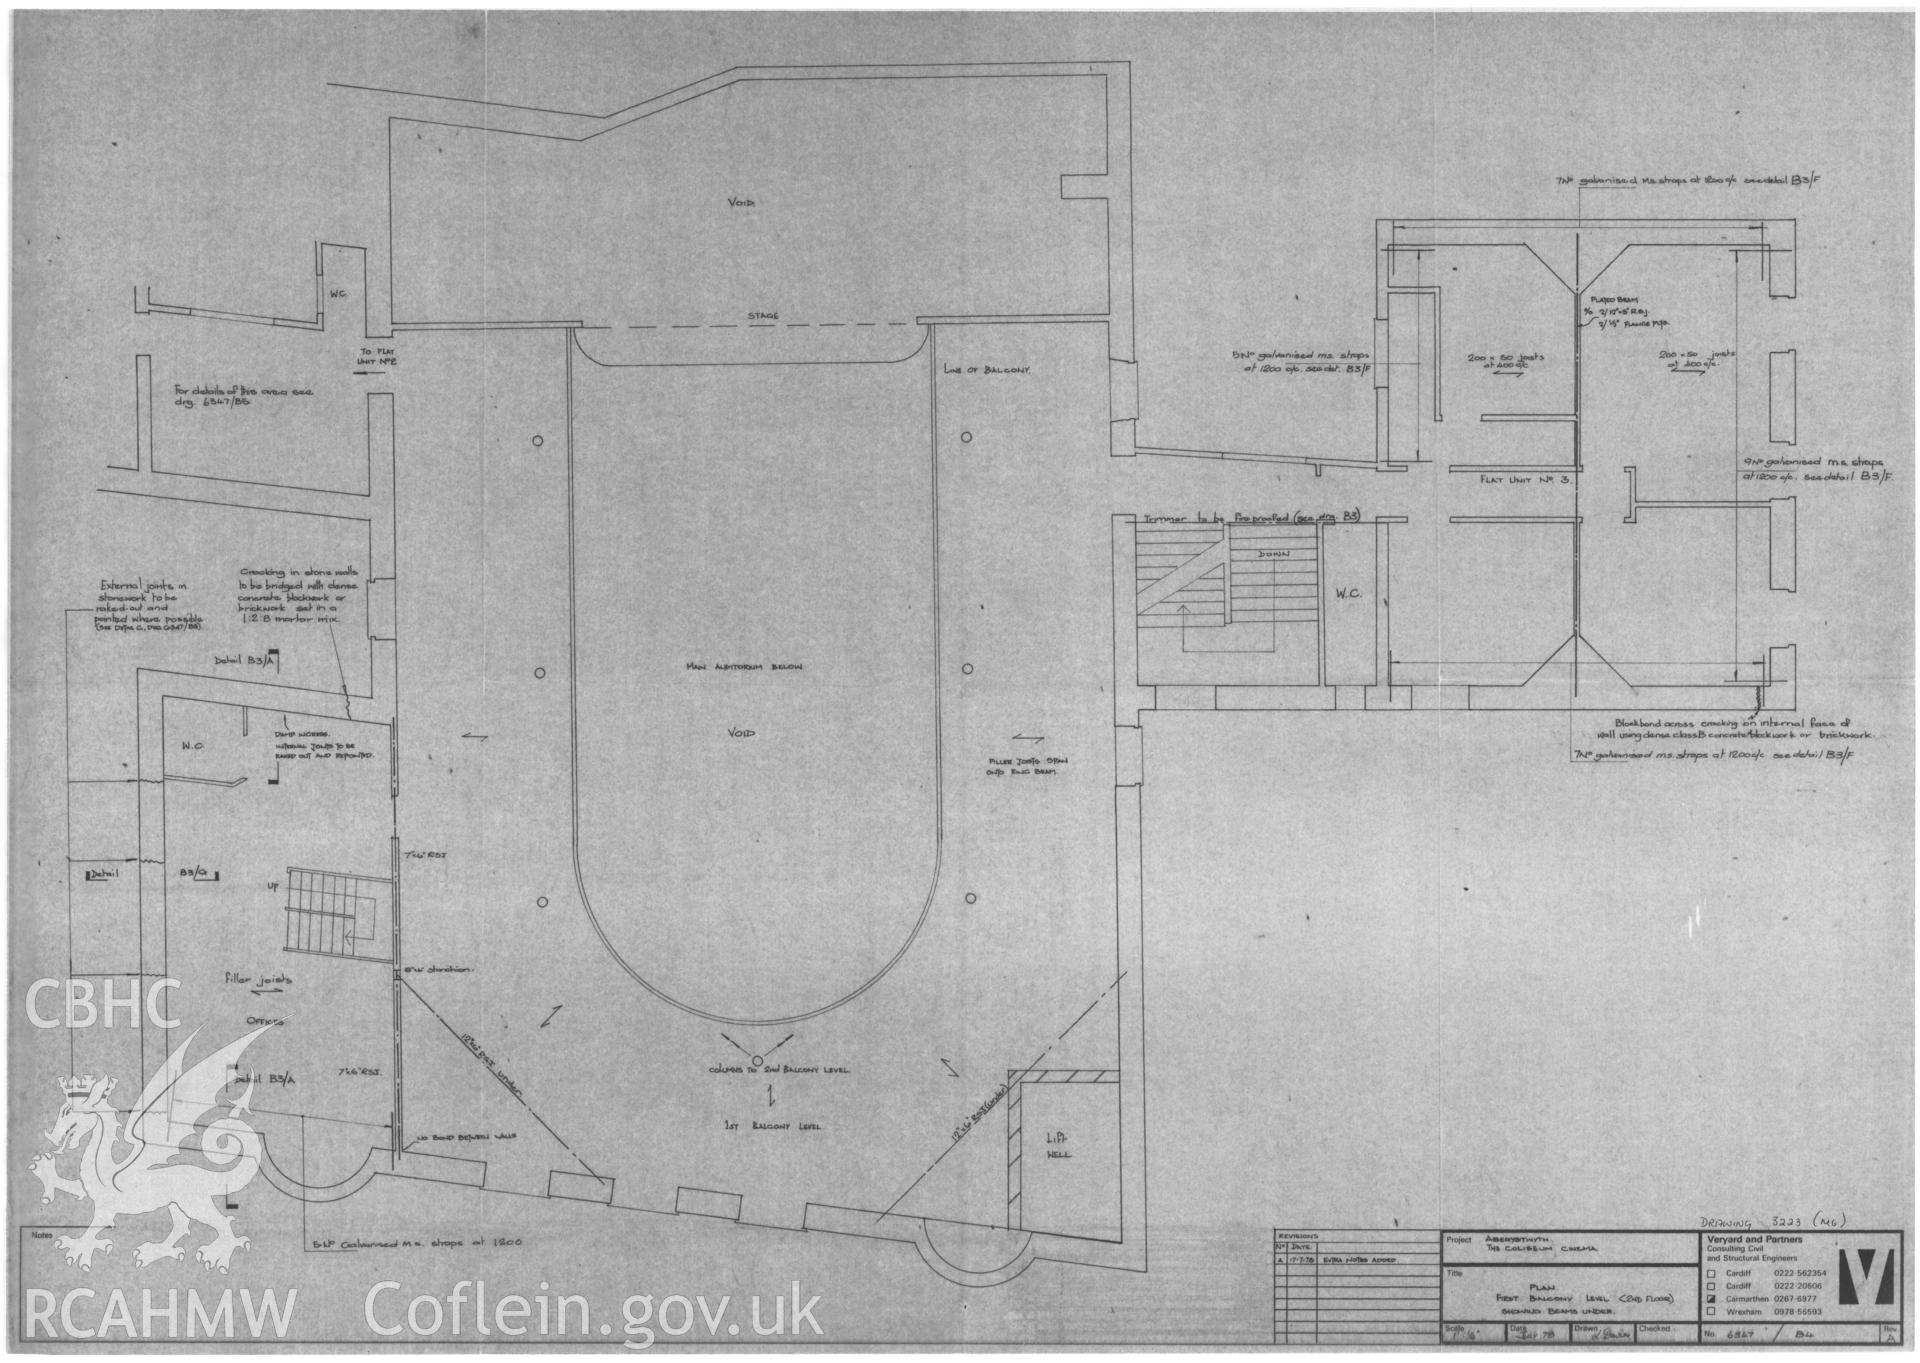 Copy of a non RCAHMW drawing showing second floor plan of Coliseum Cinema, Aberystwyth, received in the course of threatened buildings case ref no M/DES/B/CD/79/01